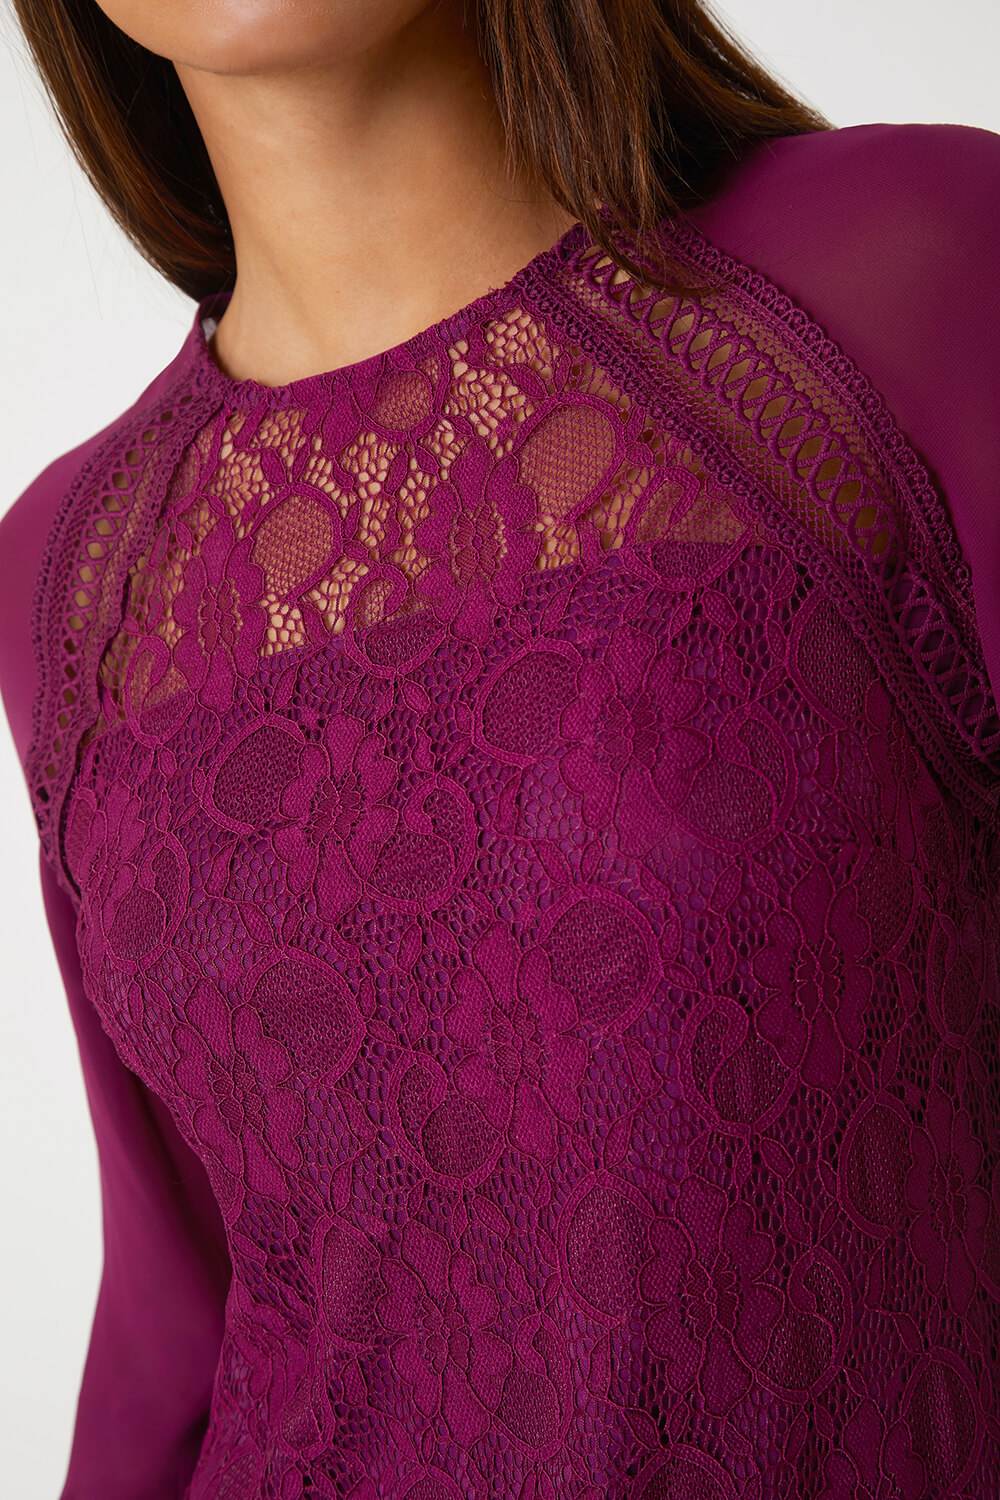 Purple Lace Detail Chiffon Sleeve Stretch Top, Image 5 of 5